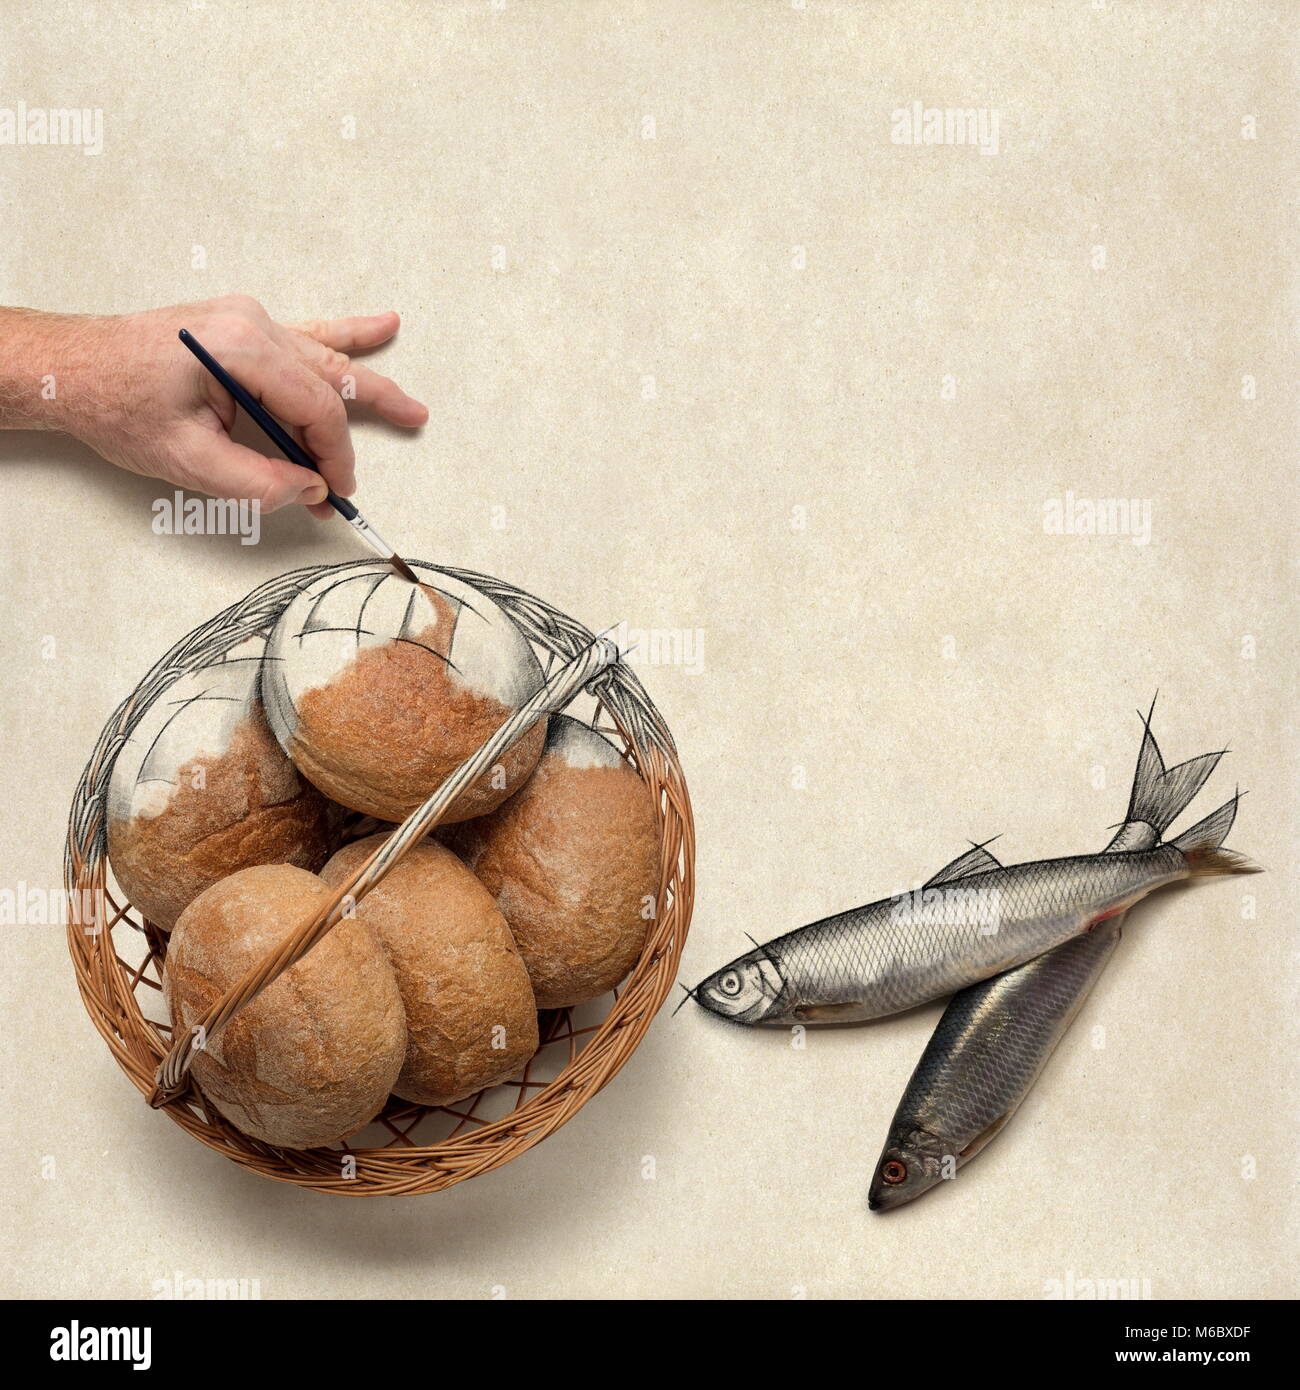 Hand painting over a drawing of five loaves of bread and two fish. Christian concept about preparing a bible study or a message on this. Stock Photo